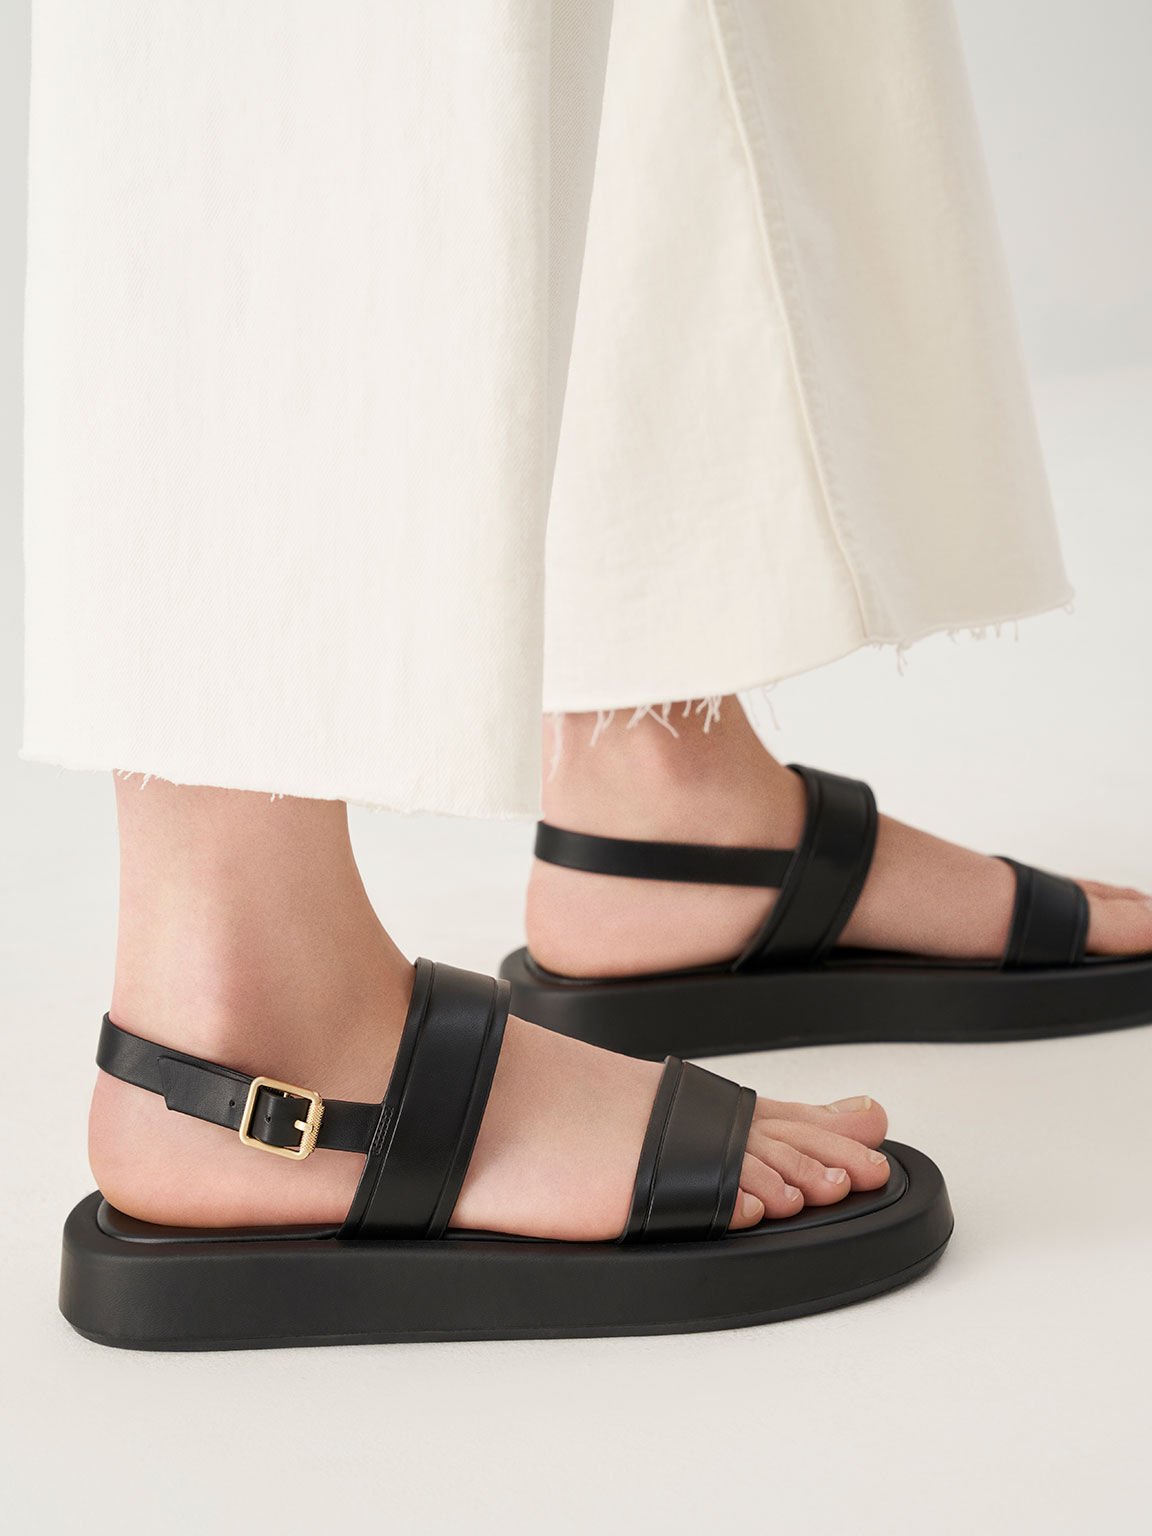 Women's Shoes | Shop Exclusive Styles - CHARLES & KEITH US